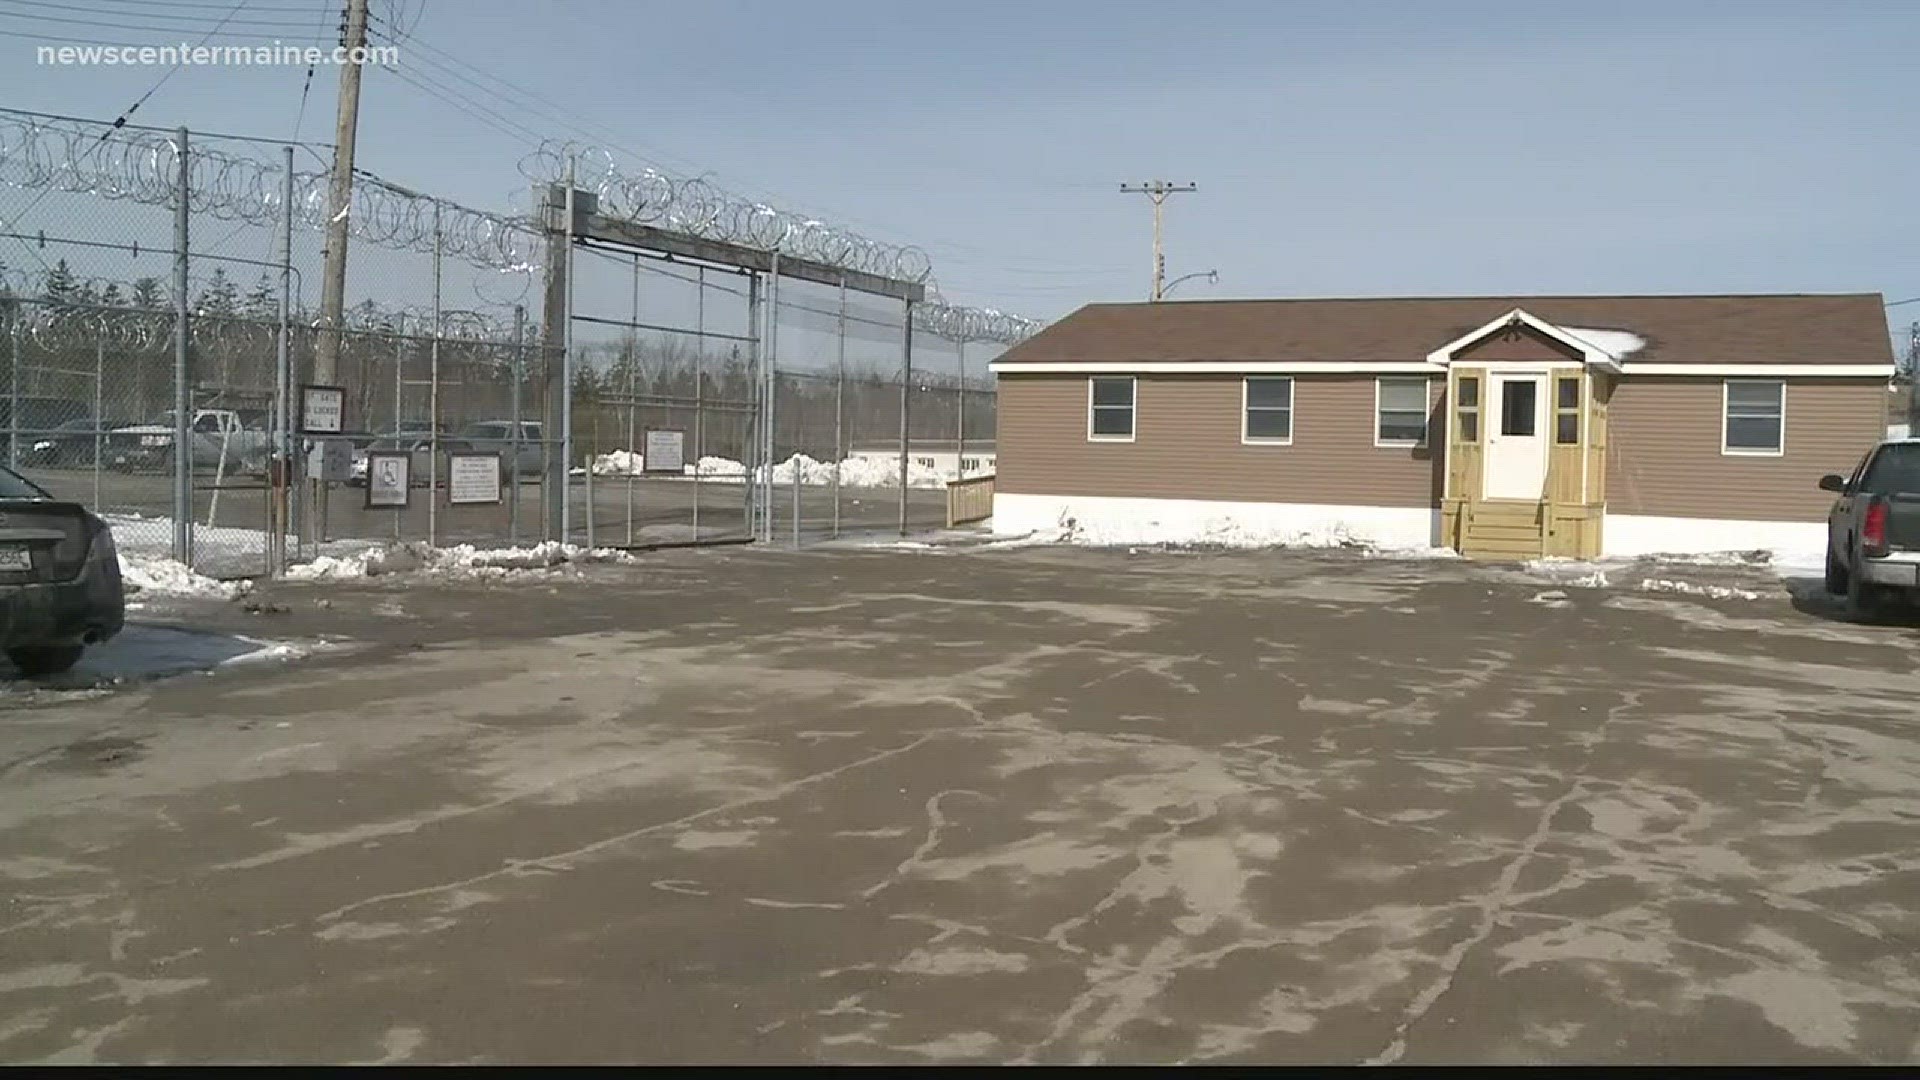 Gov reax to court ruling on Downeast Prison decision